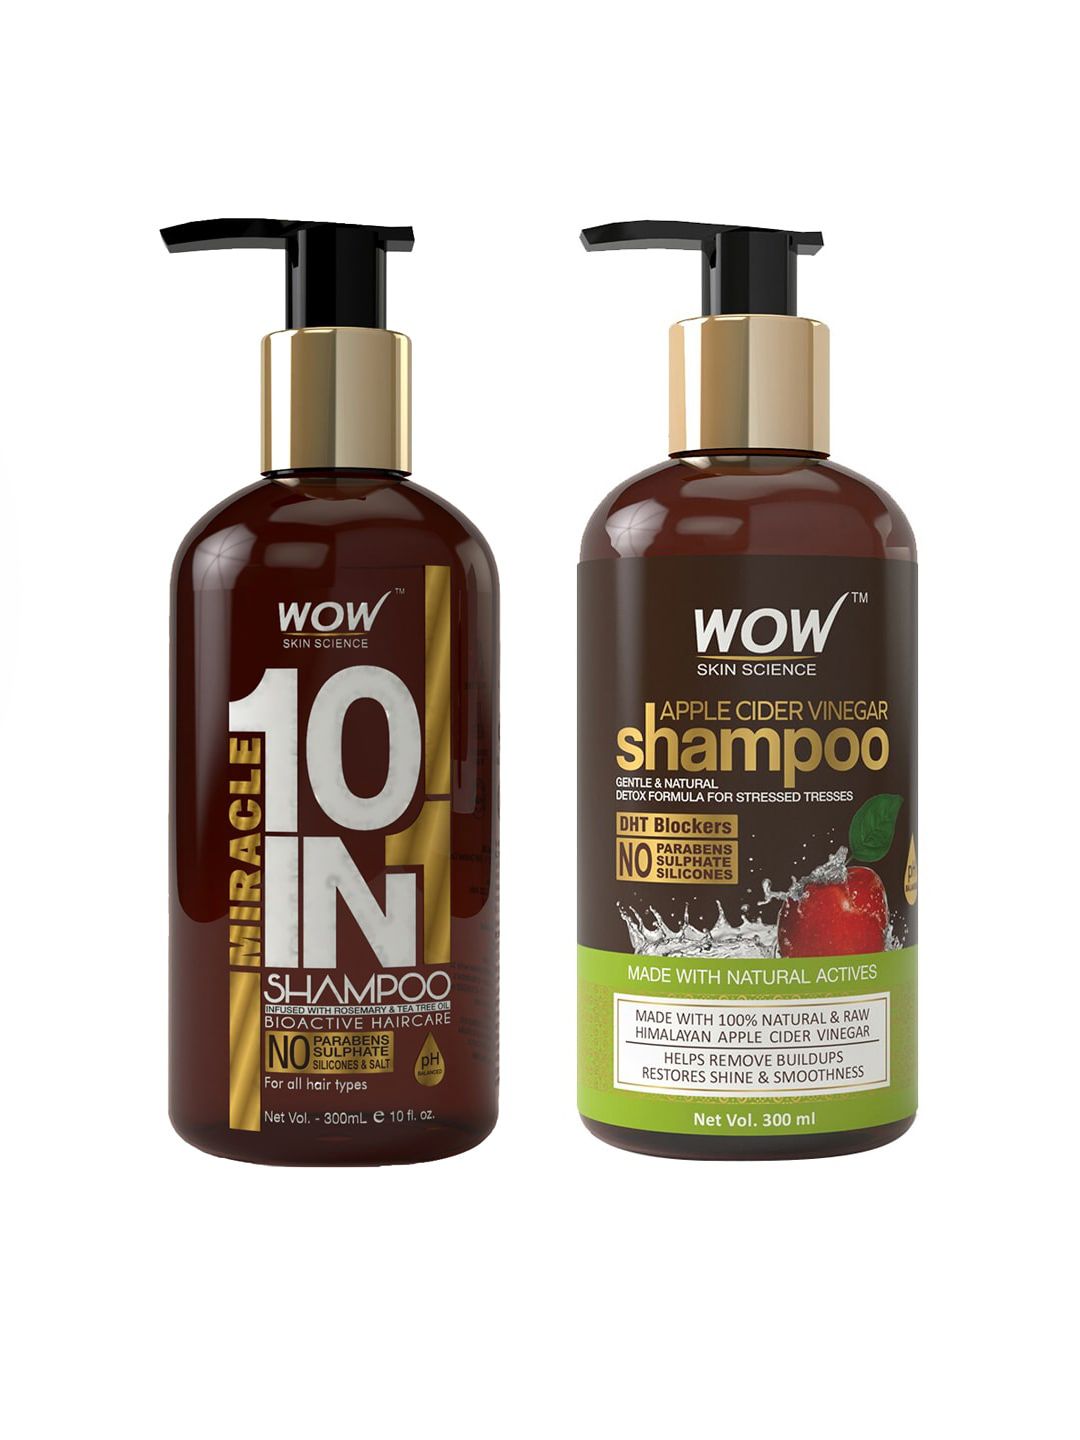 WOW SKIN SCIENCE Set of Miracle 10 in 1 Shampoo & Apple Cider Vinegar Shampoo Price in India